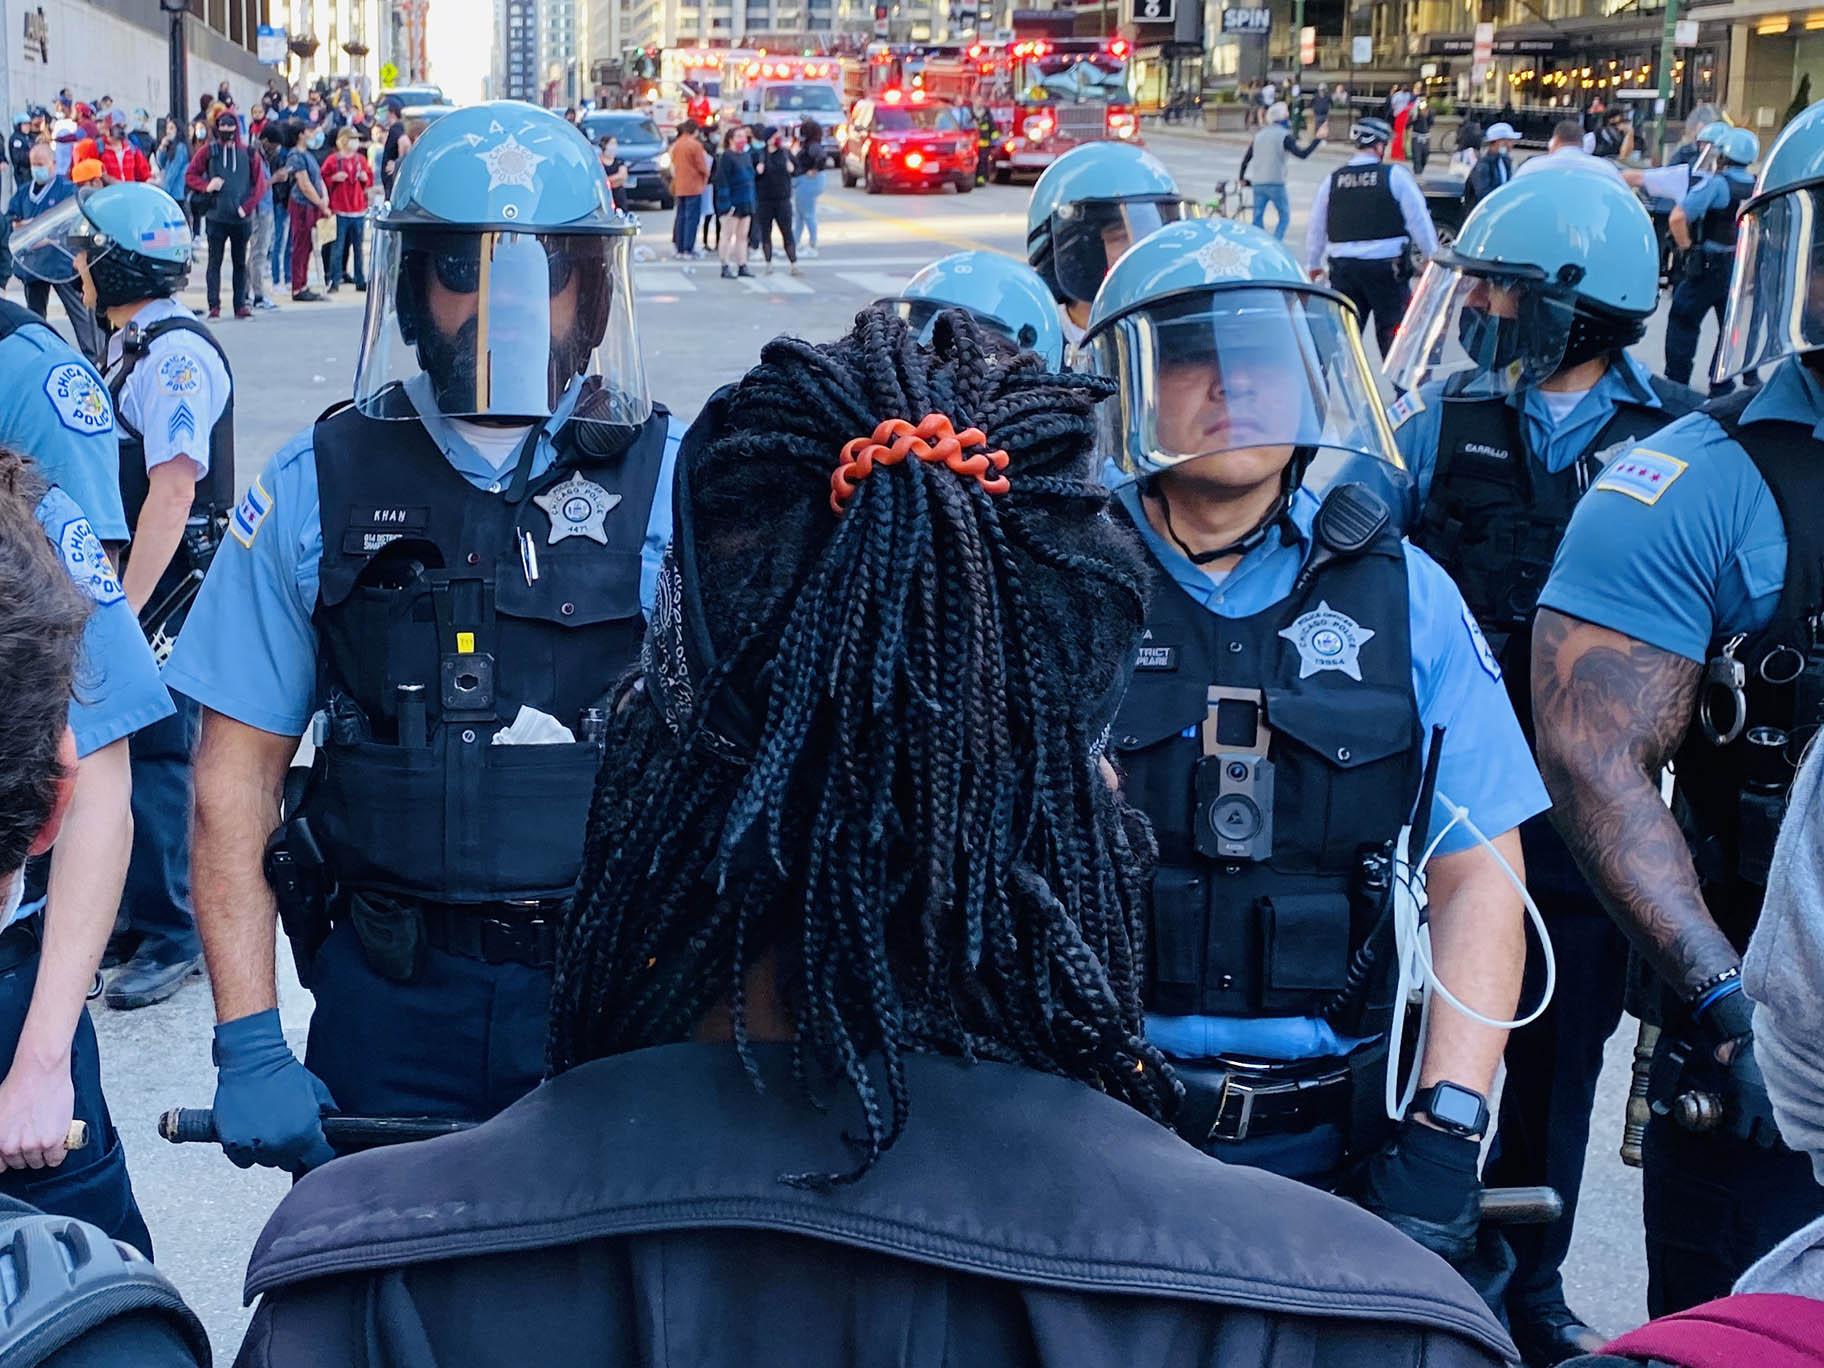 A protester faces off against police in Chicago on Saturday, May 30, 2020. (Hugo Balta / WTTW News)